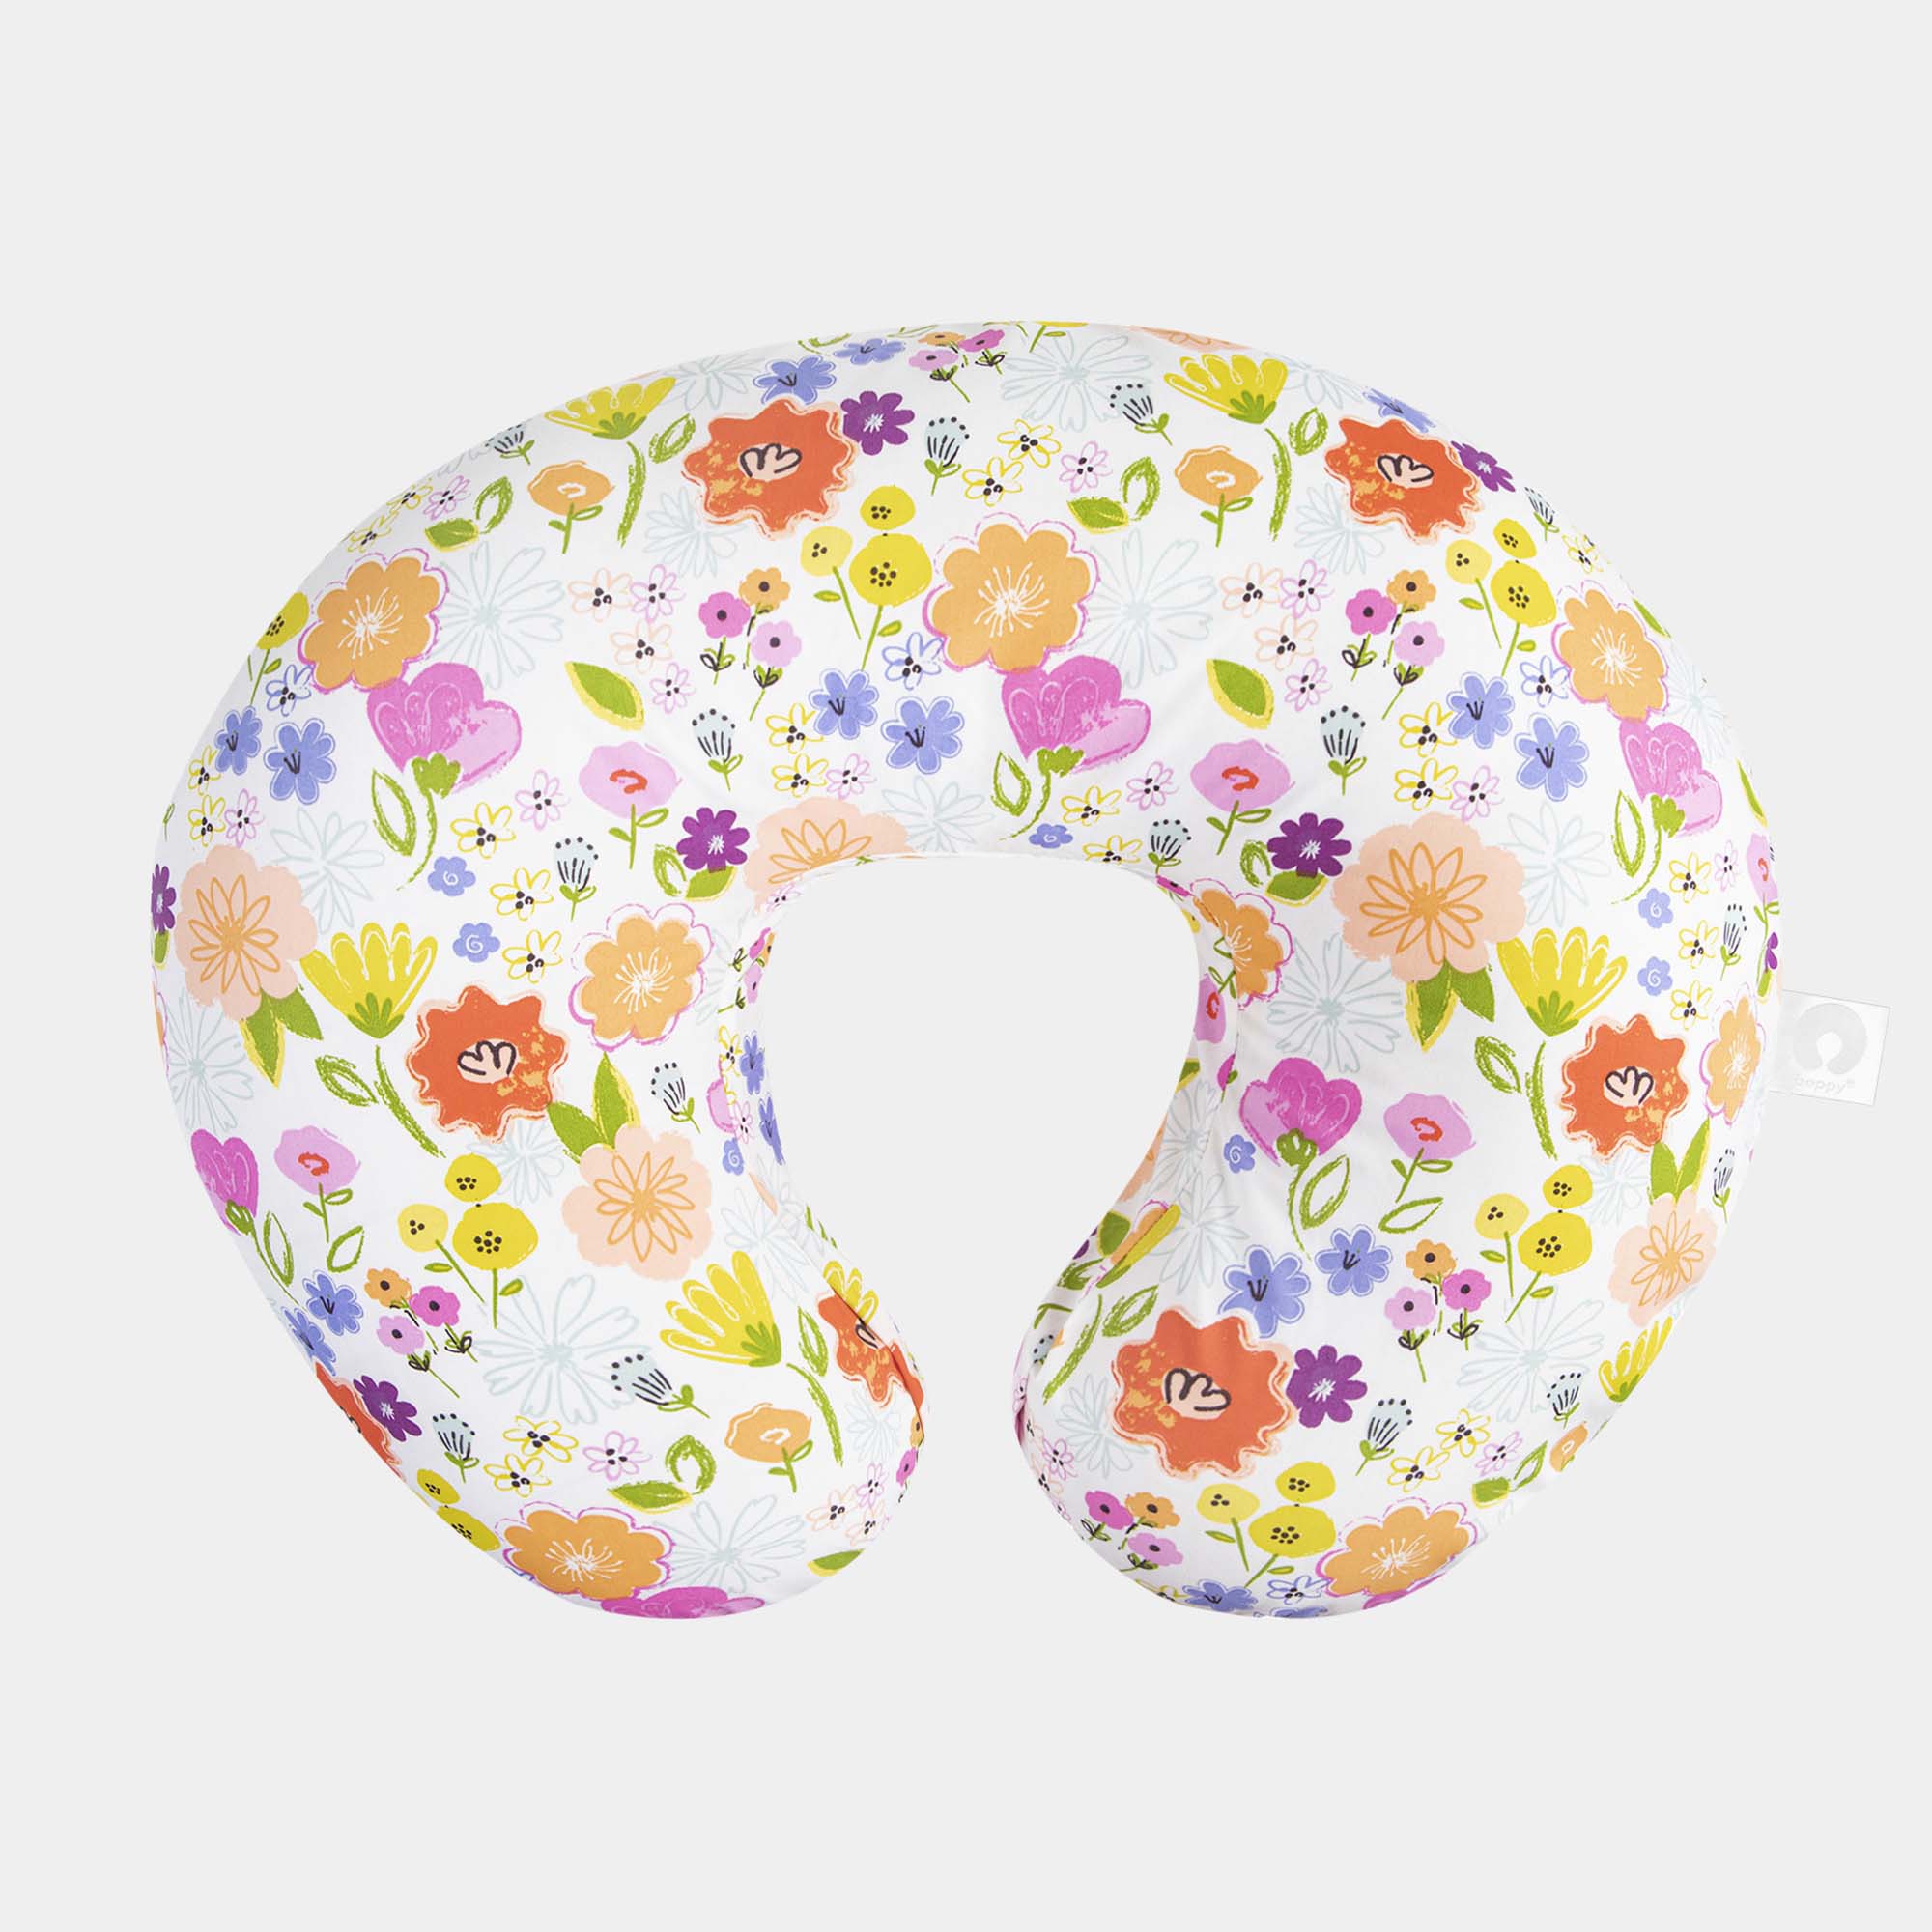 Nursing Pillow with Organic Fabric and PLA Fill + Waterproof Cover